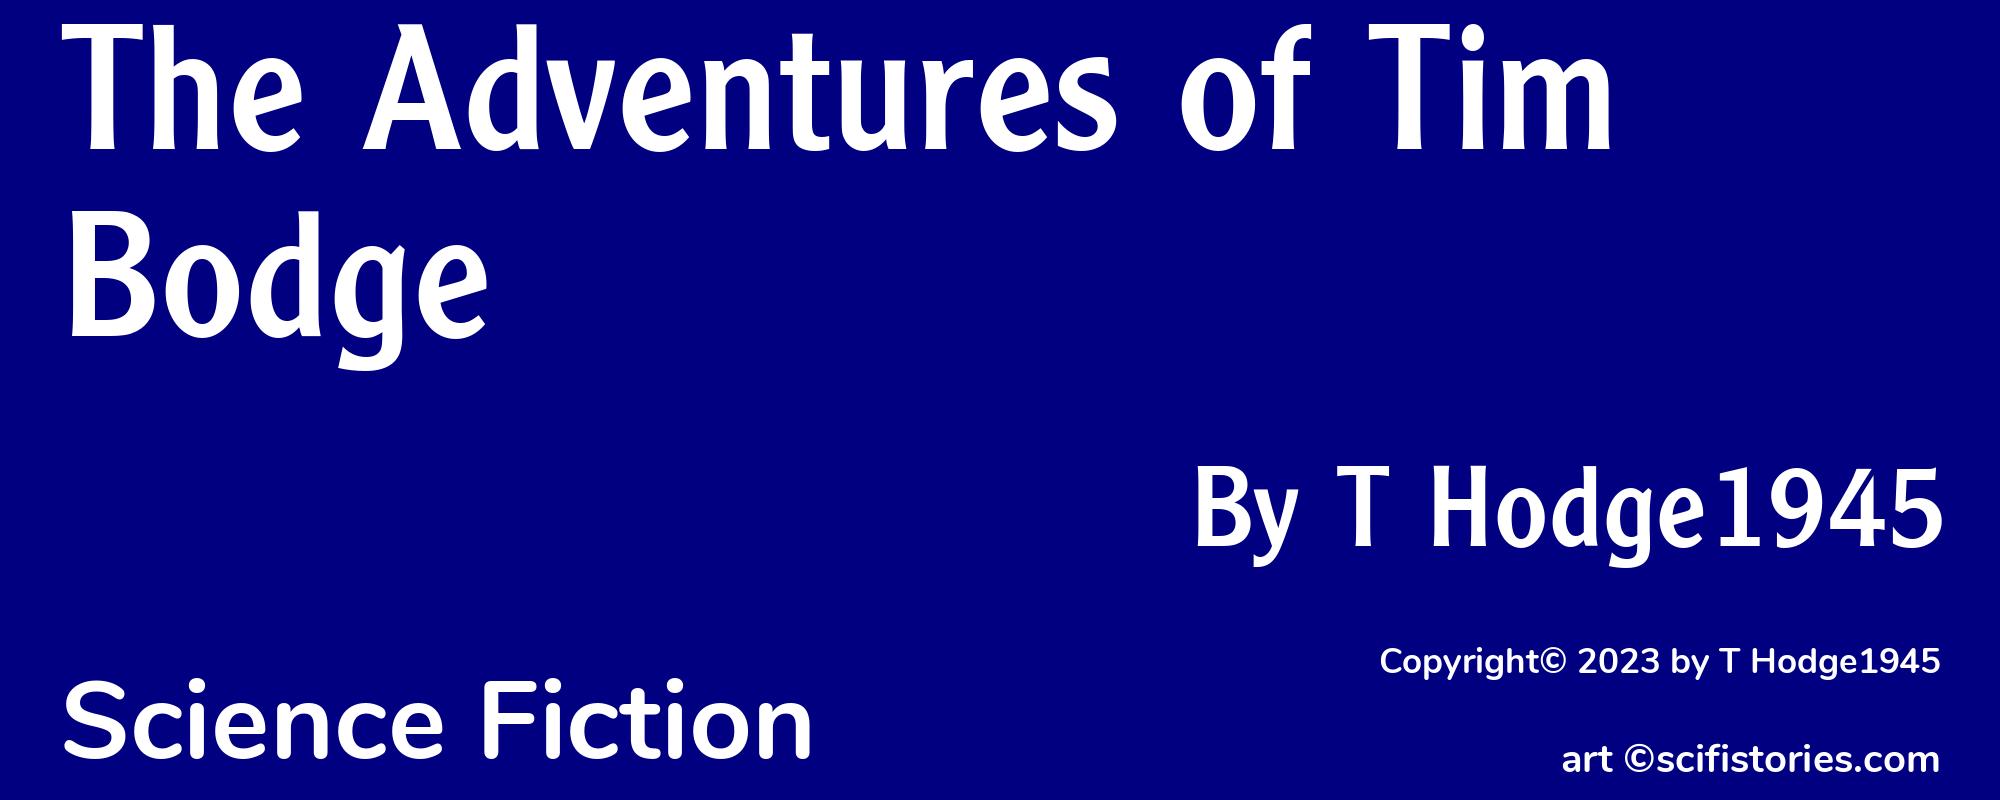 The Adventures of Tim Bodge - Cover